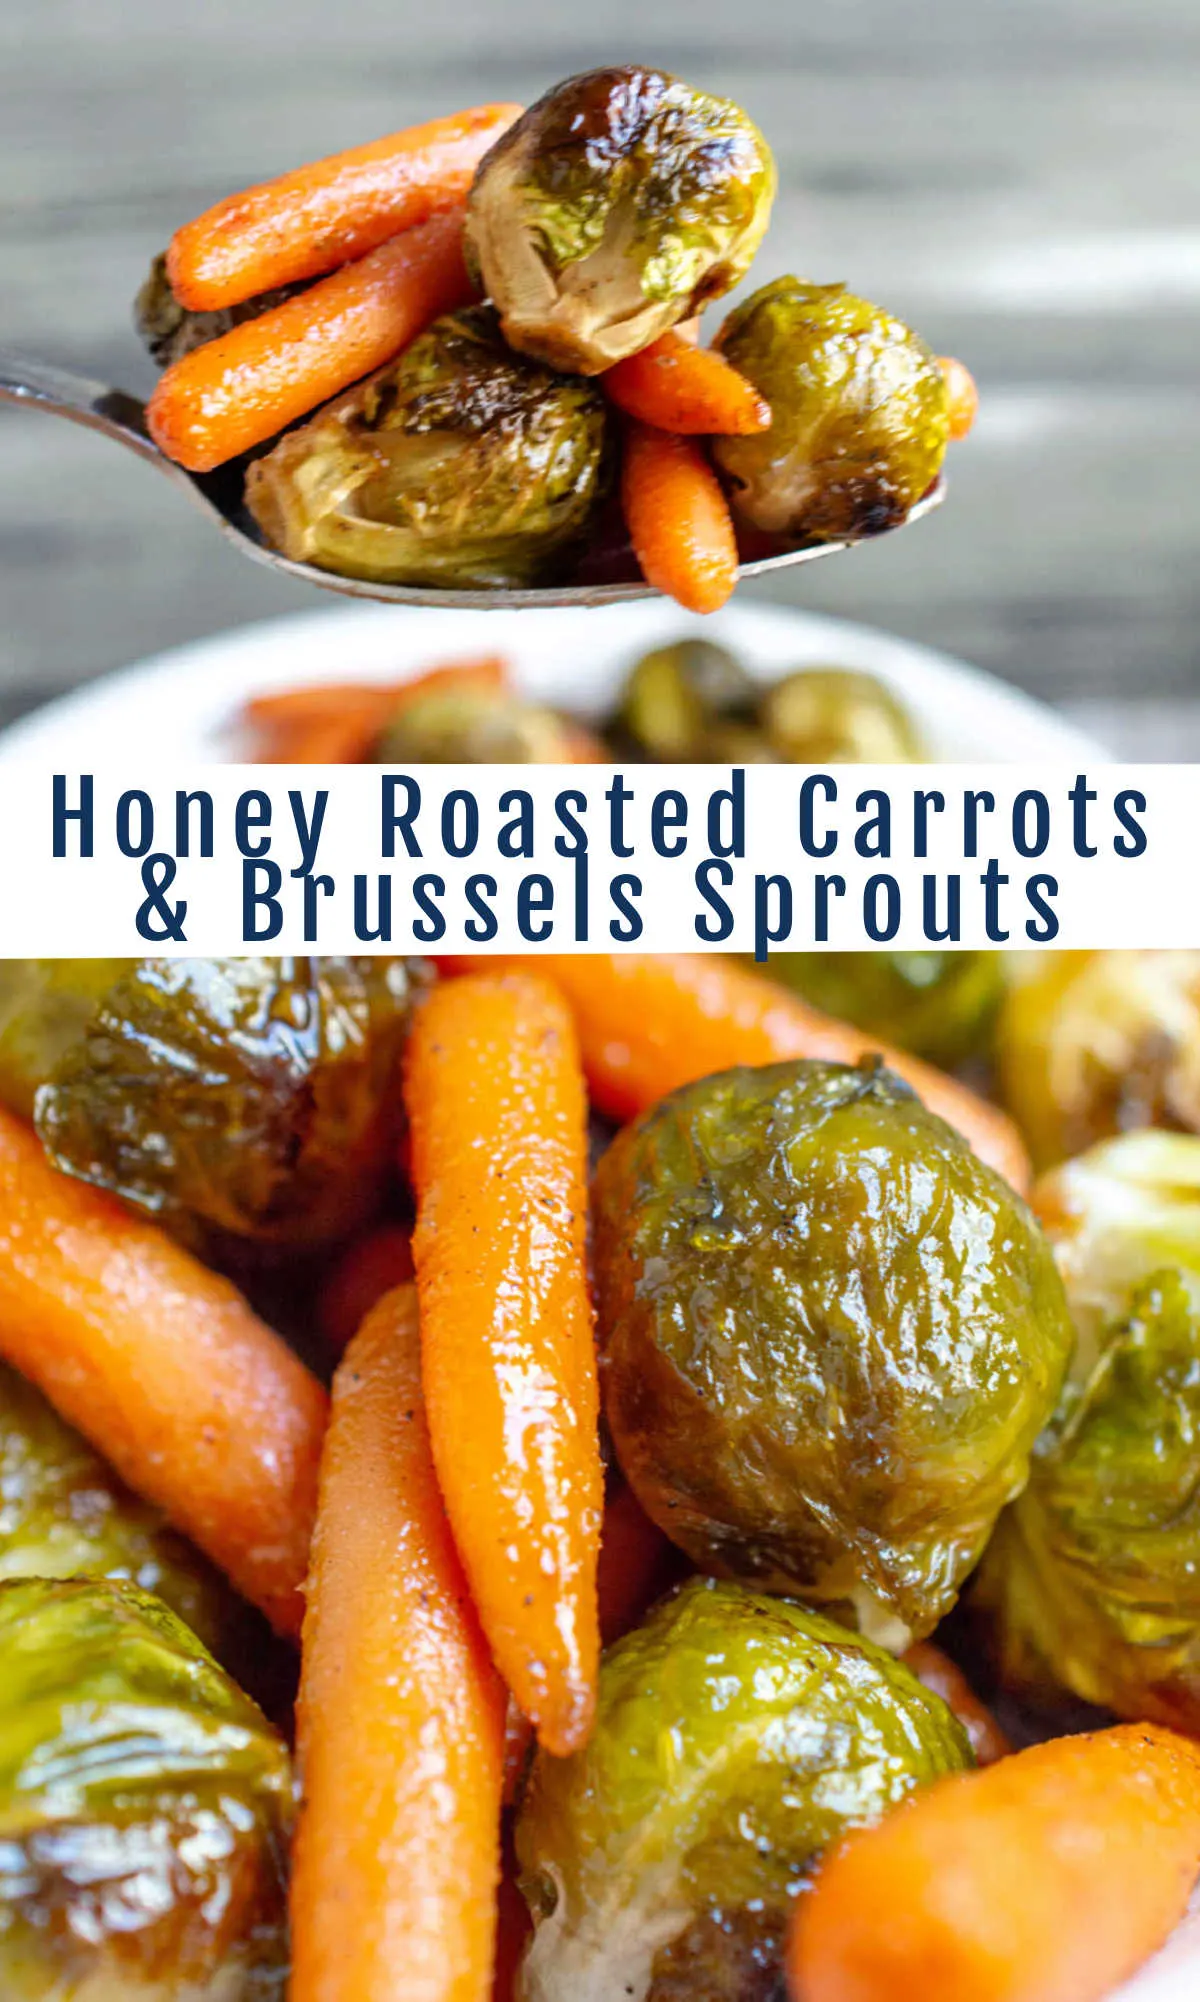 Upgrade your side dish routine with this simple recipe for honey roasted baby carrots and Brussels sprouts. It goes with almost any entree and is a great way to get your family to eat more vegetables.